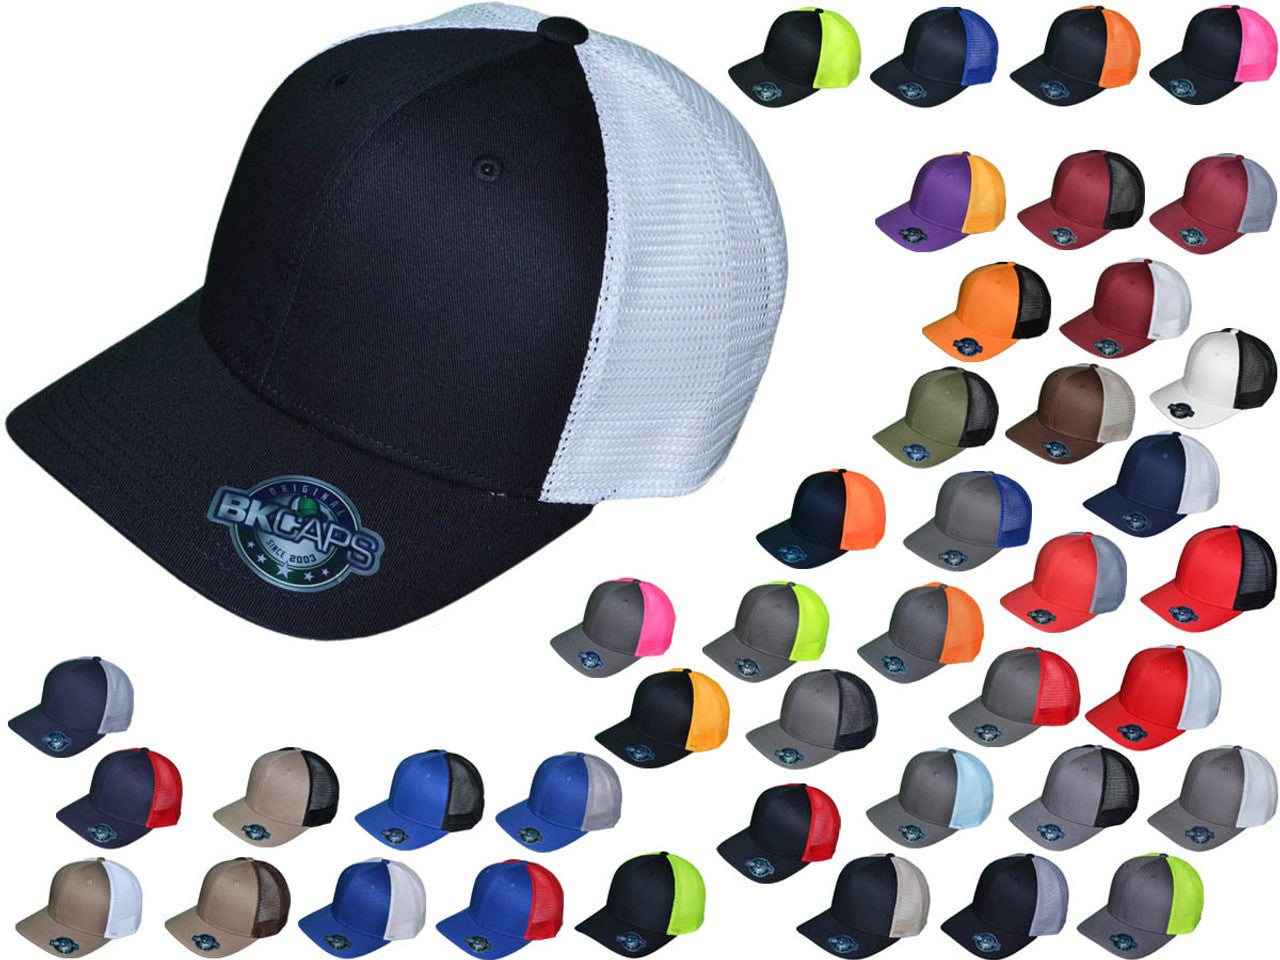 Express Your Style with Custom Snapback Hats